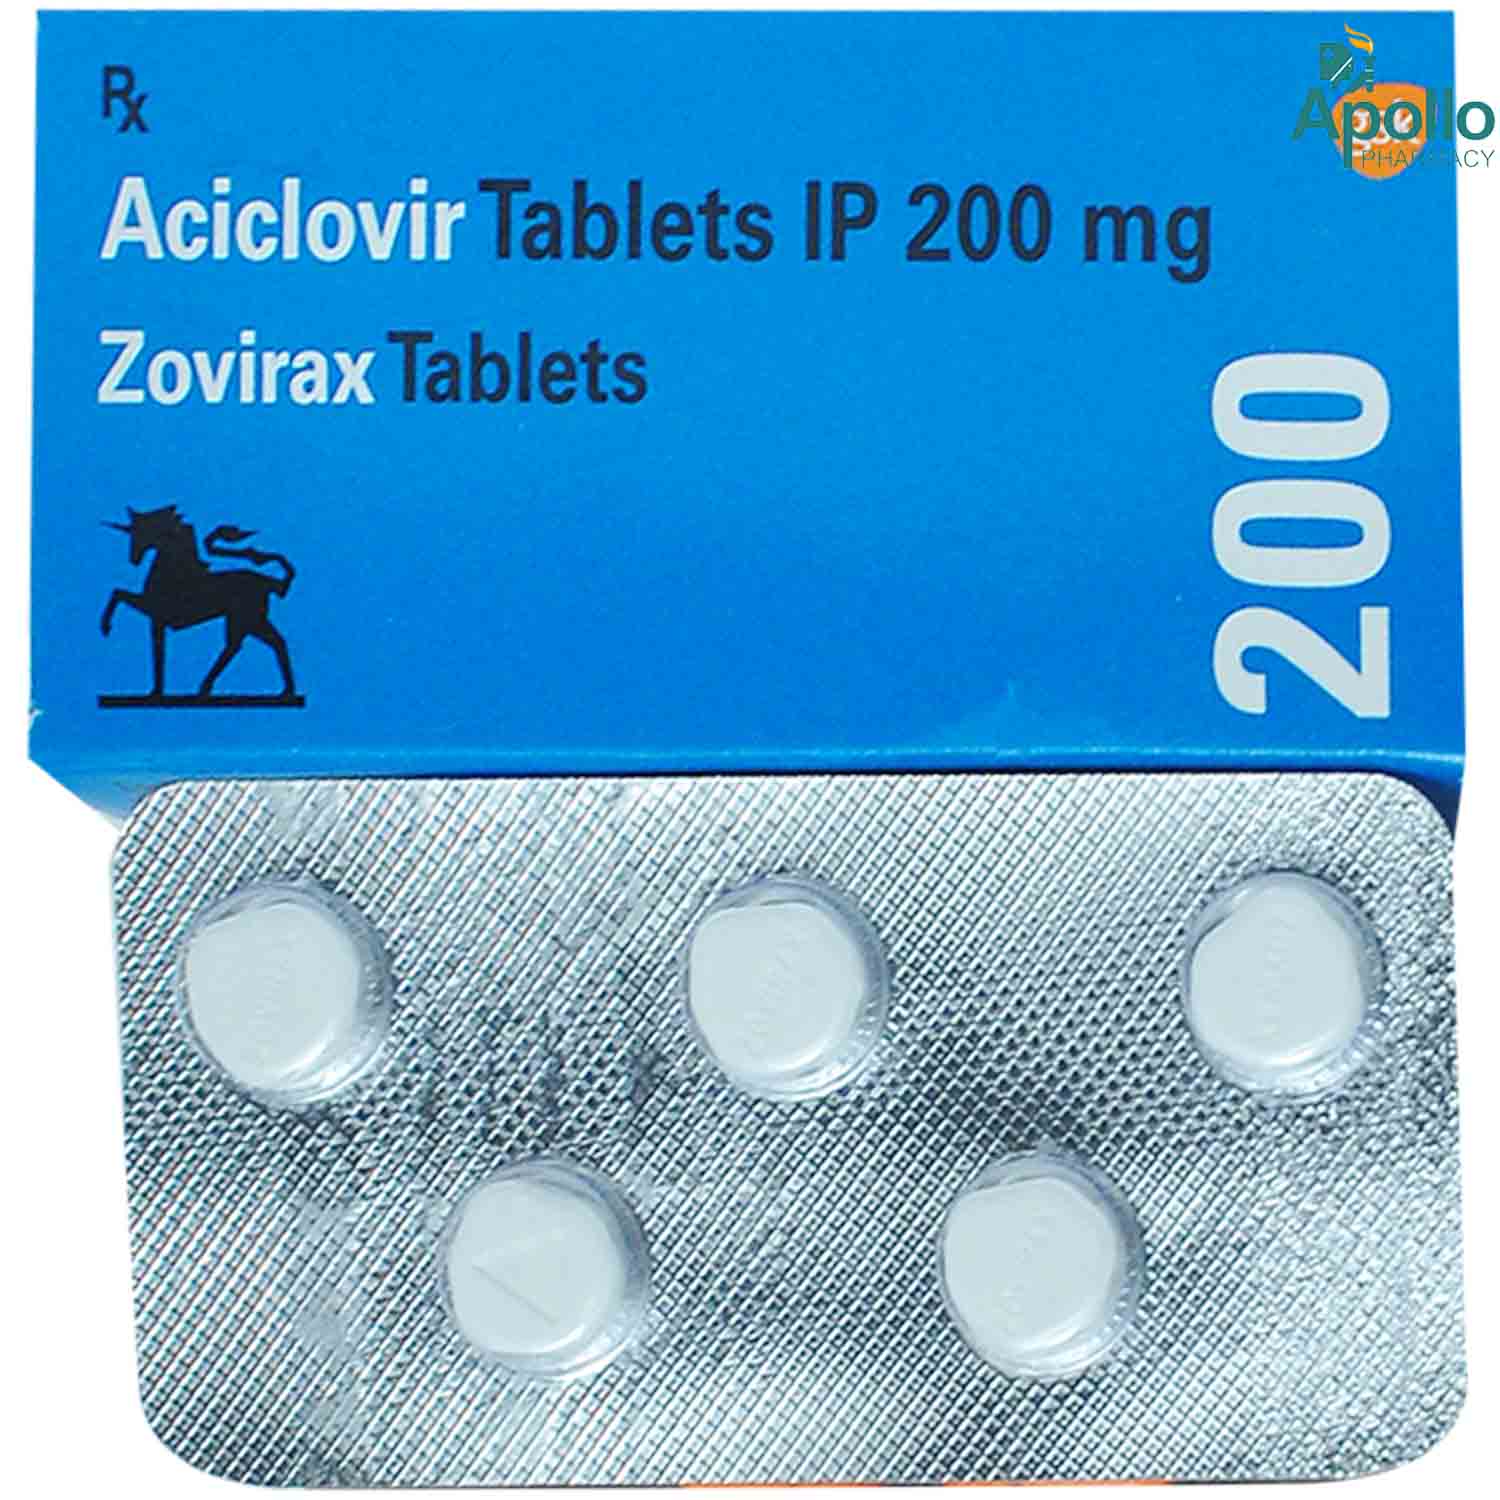 zovirax uses and side effects